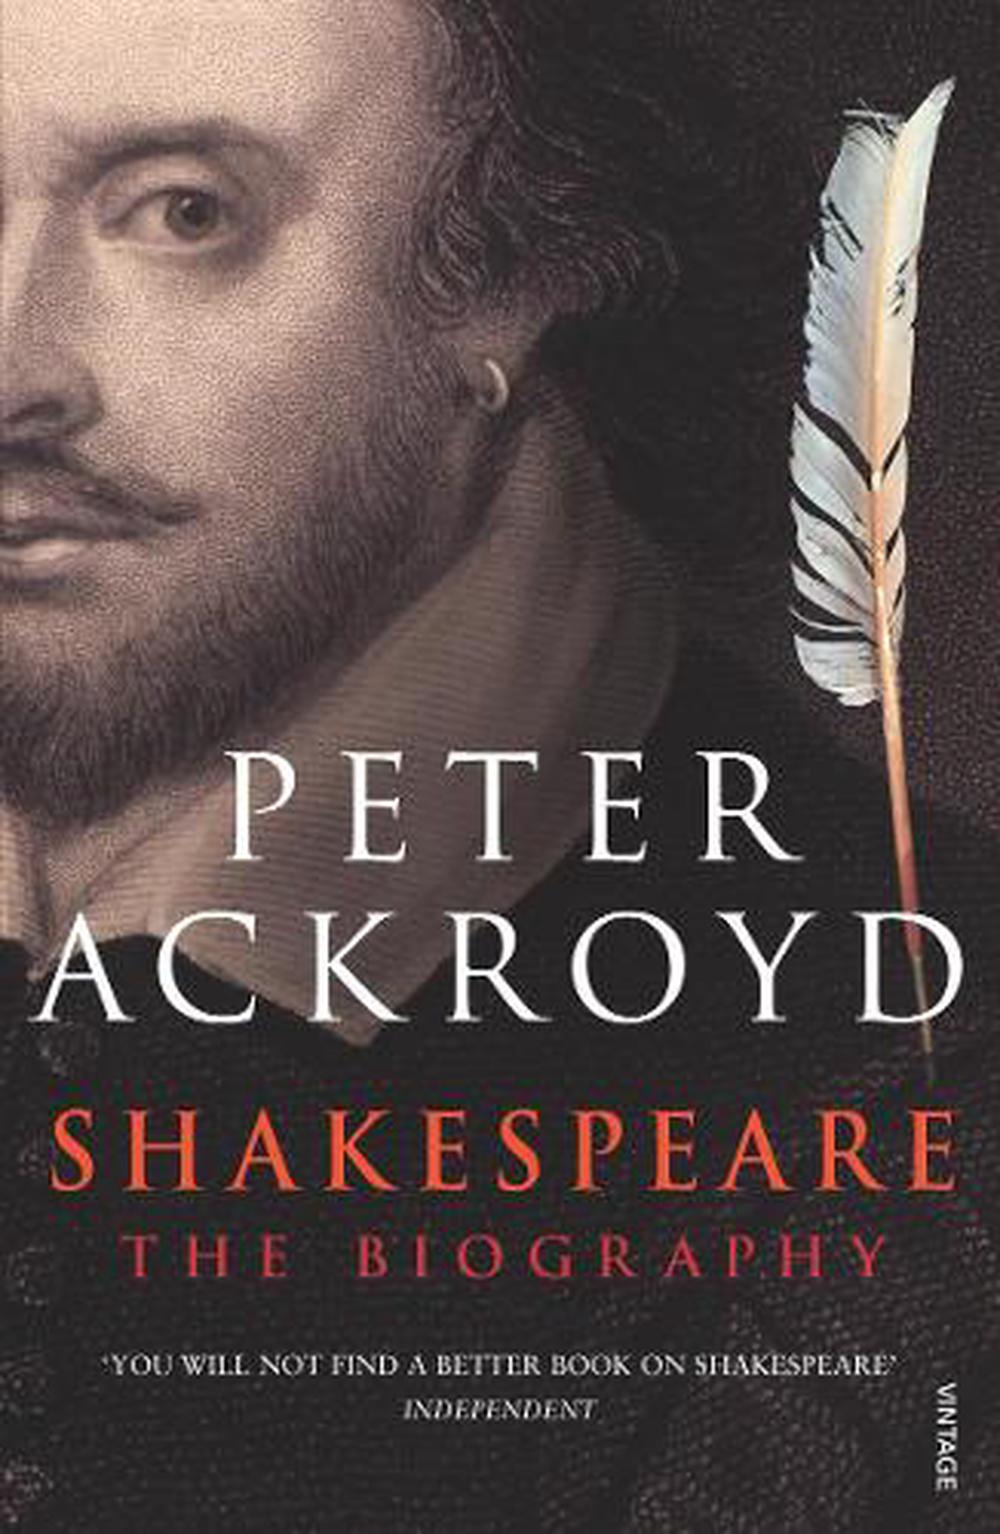 biography of shakespeare book